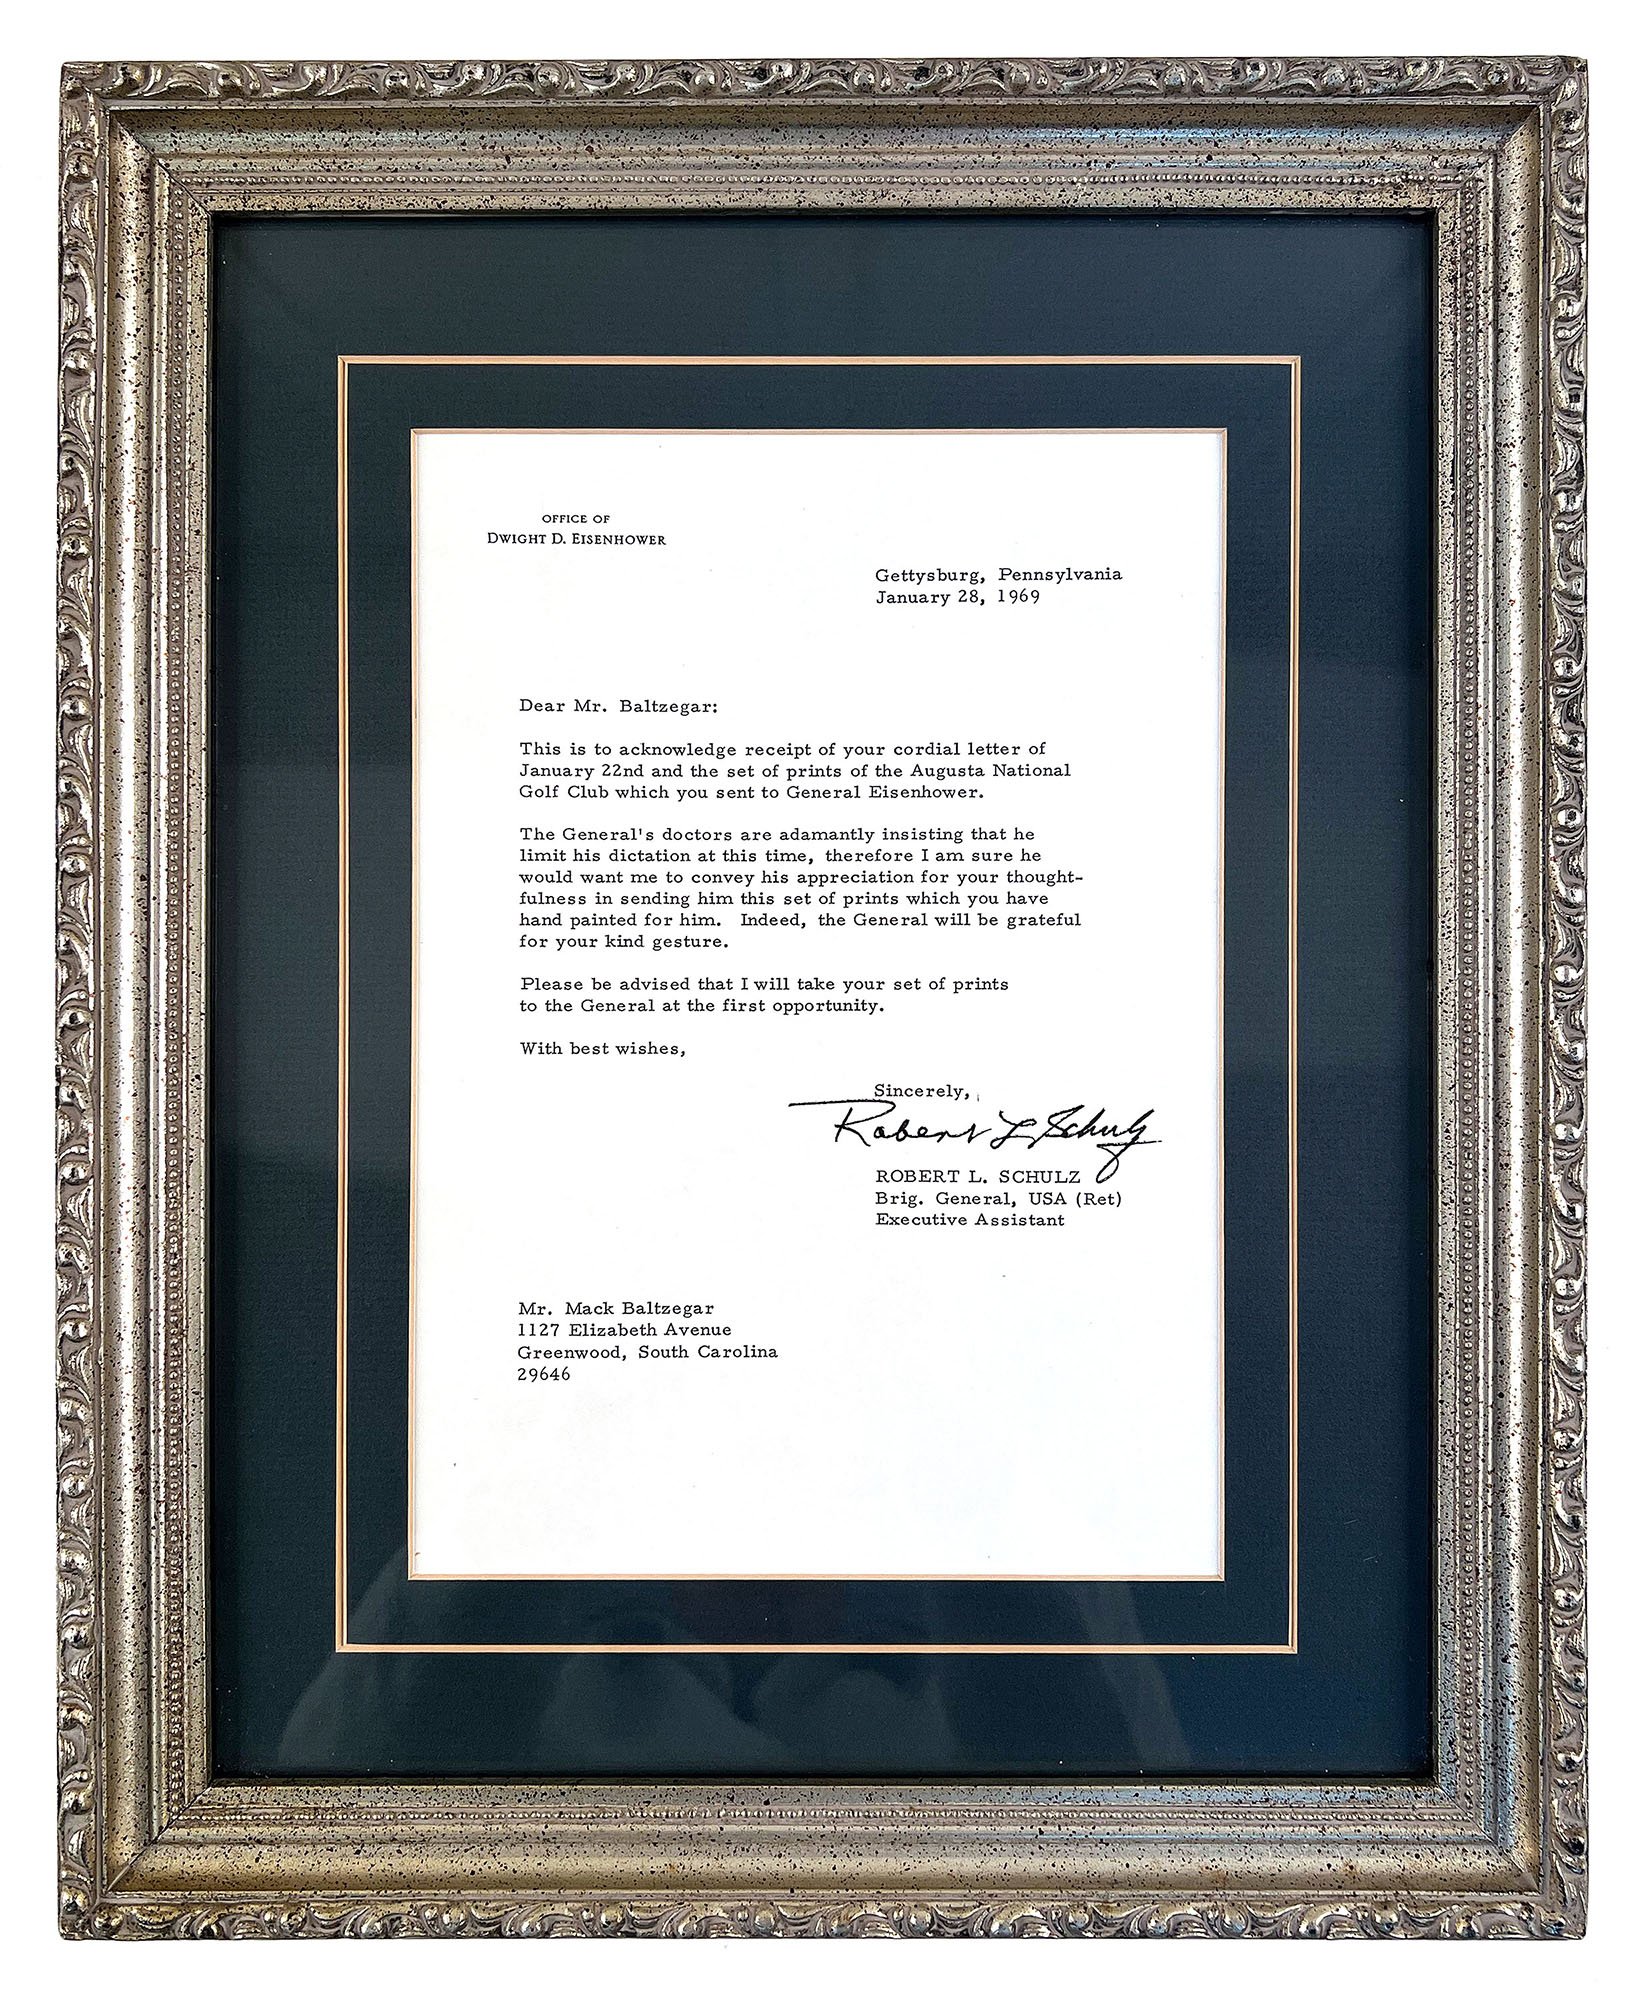 Correspondence from the Office of Gen. Dwight D. Eisenhower